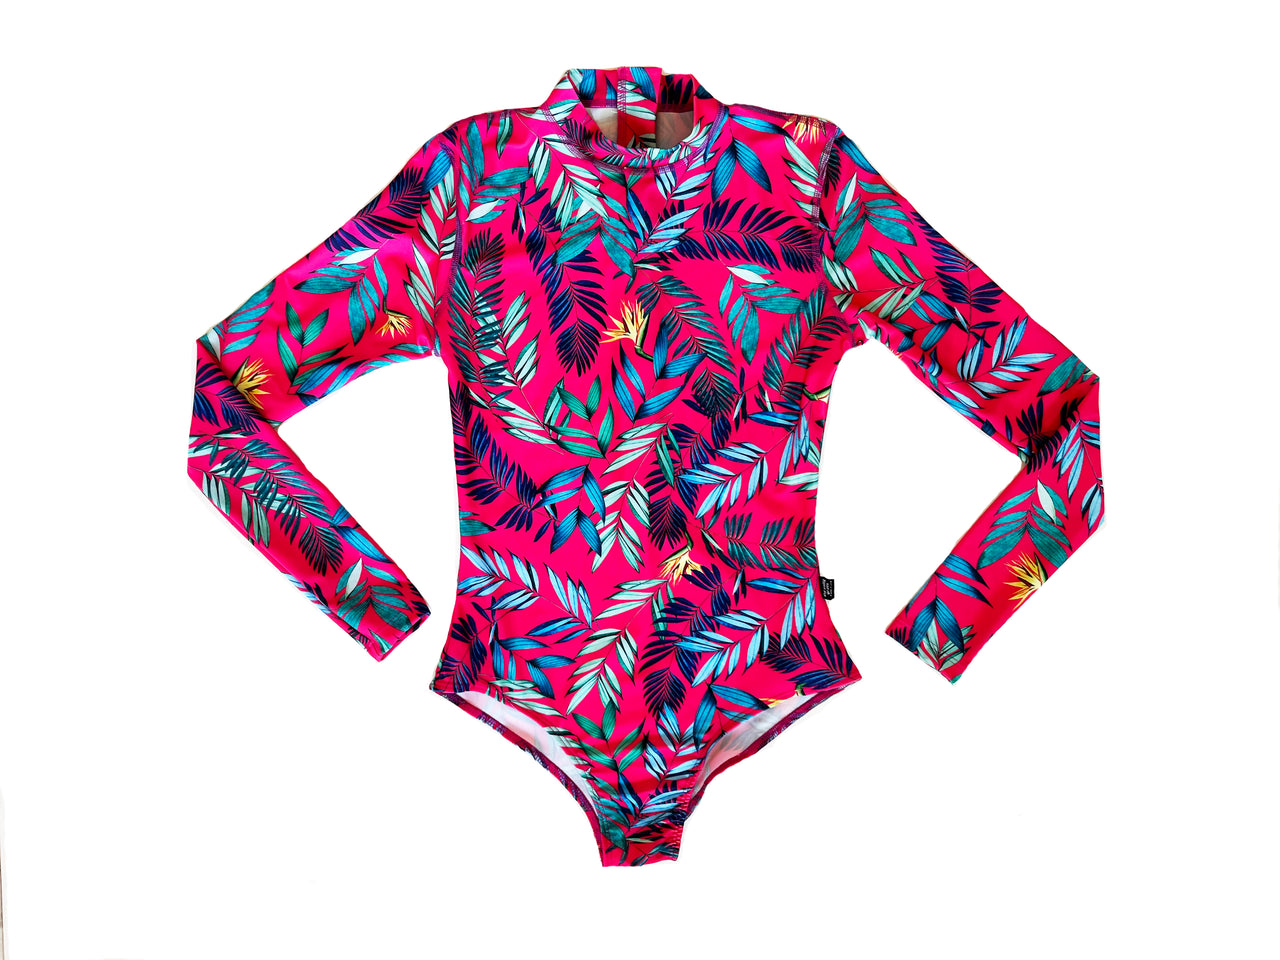 Women's One-Piece SHRED Suit